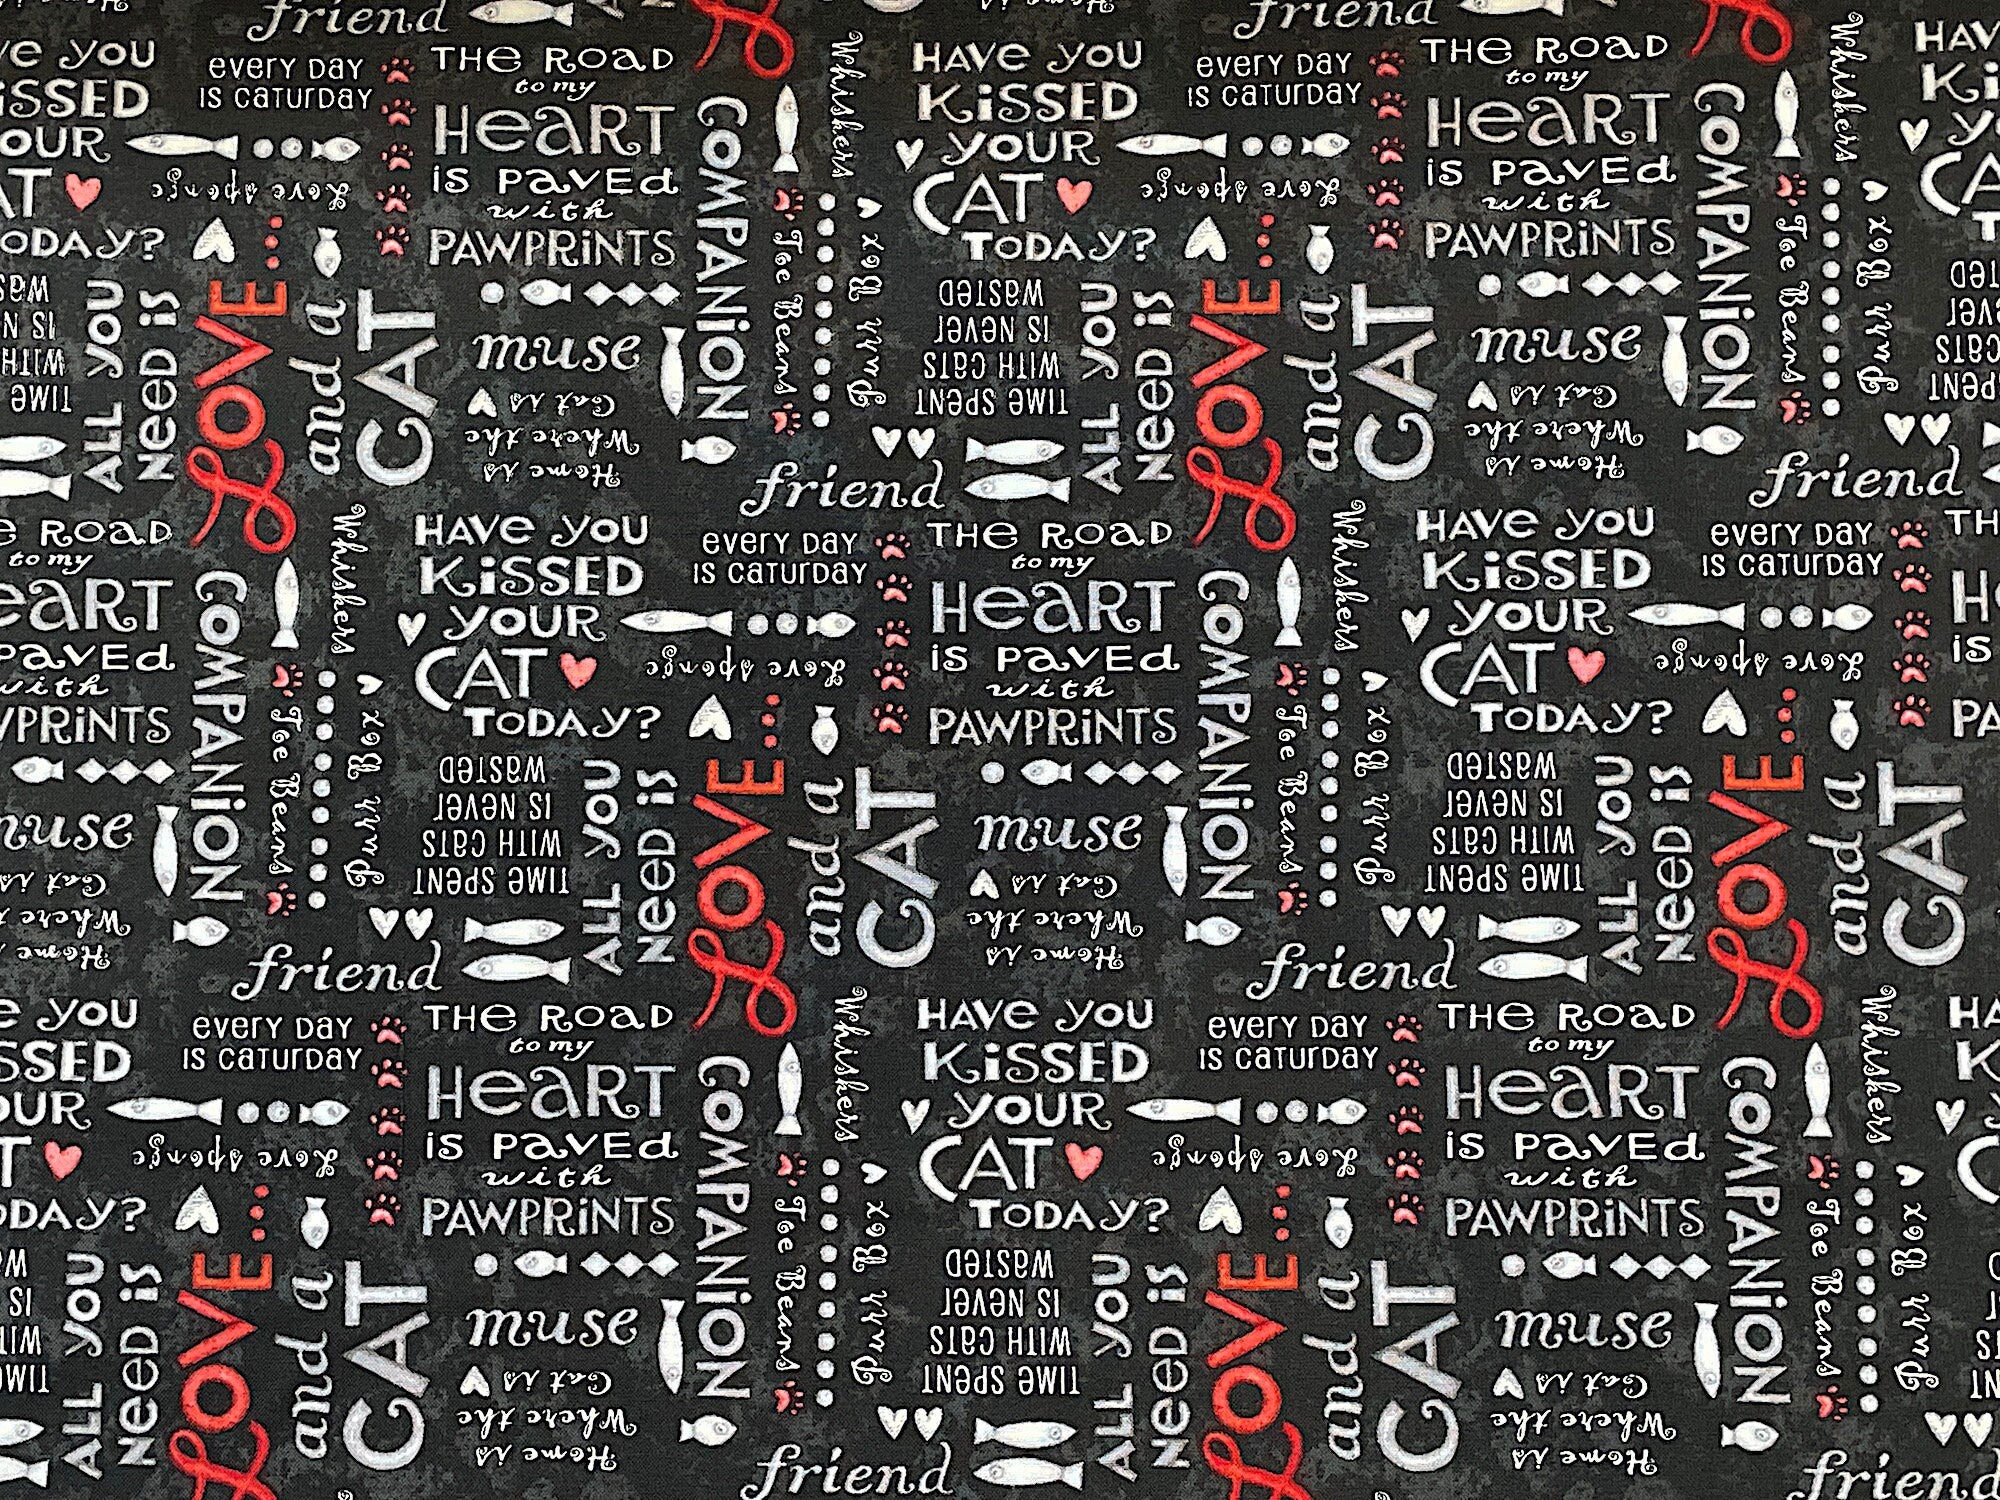 This black cotton fabric is called All You Need is Love and a Cat and is covered with cat sayings such as love, every day is caturday, the road to my heart is paved with pawprints, all you need is love, and more.